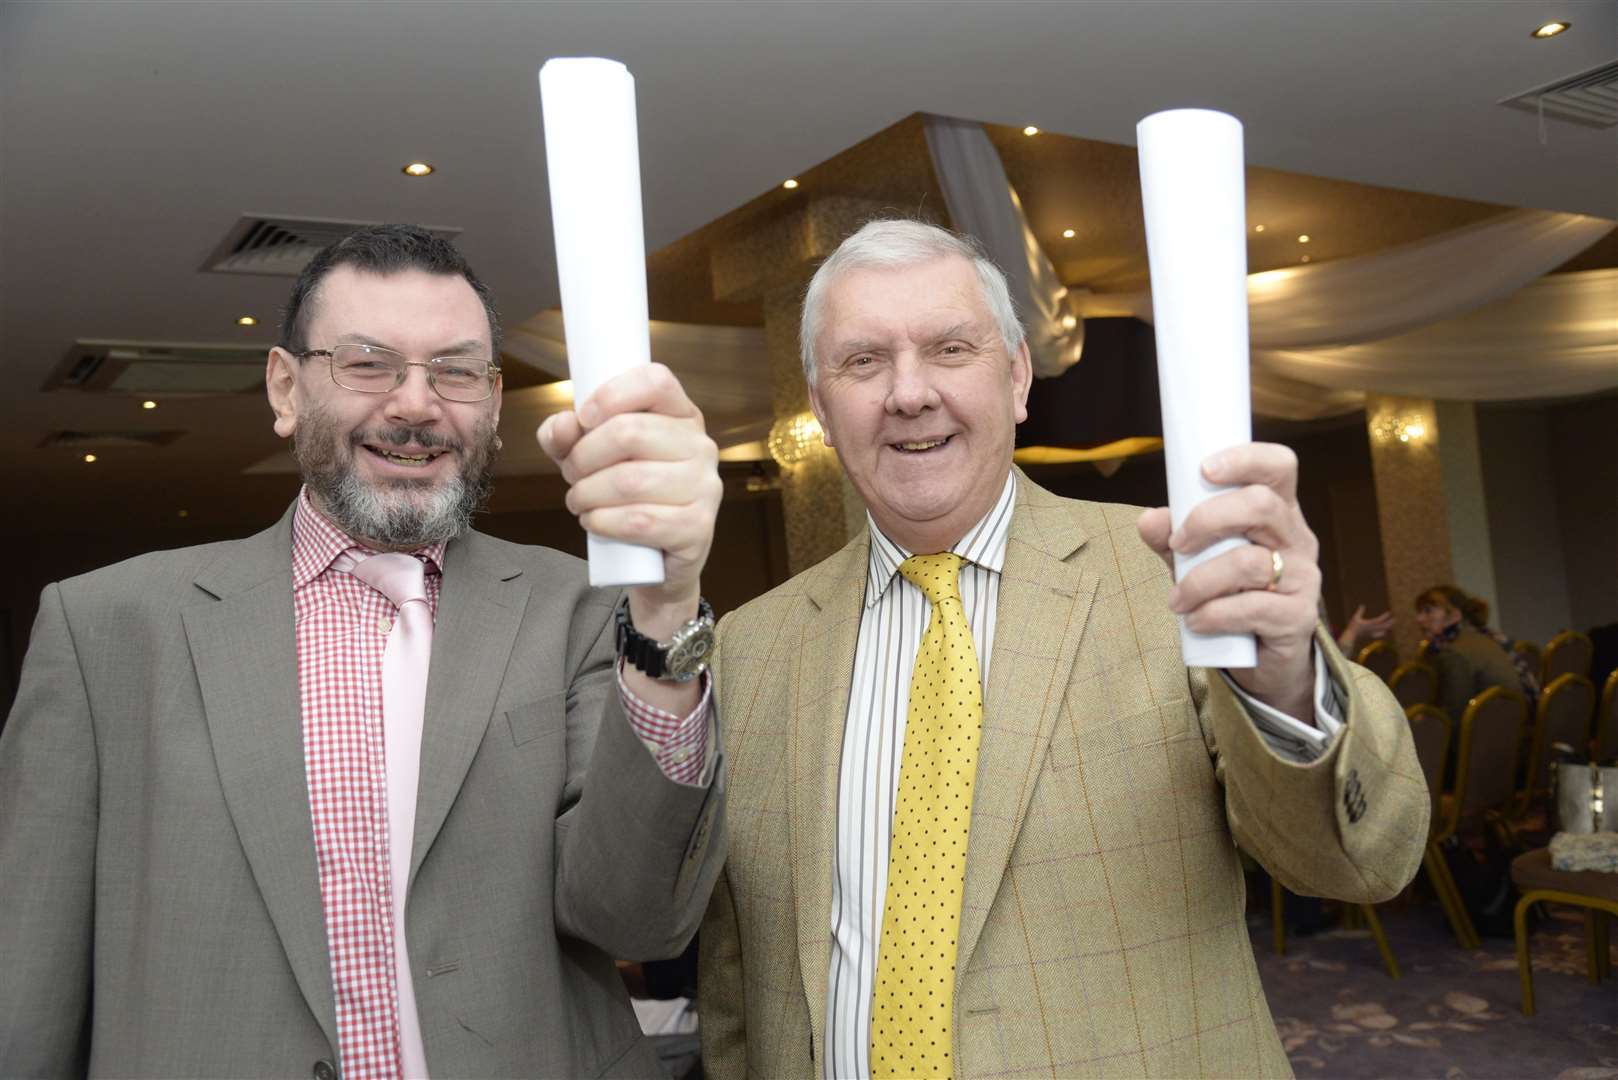 Cllr Paul Harper and Gareth Owen, seen celebrating victory after winning the planning appeal two years ago